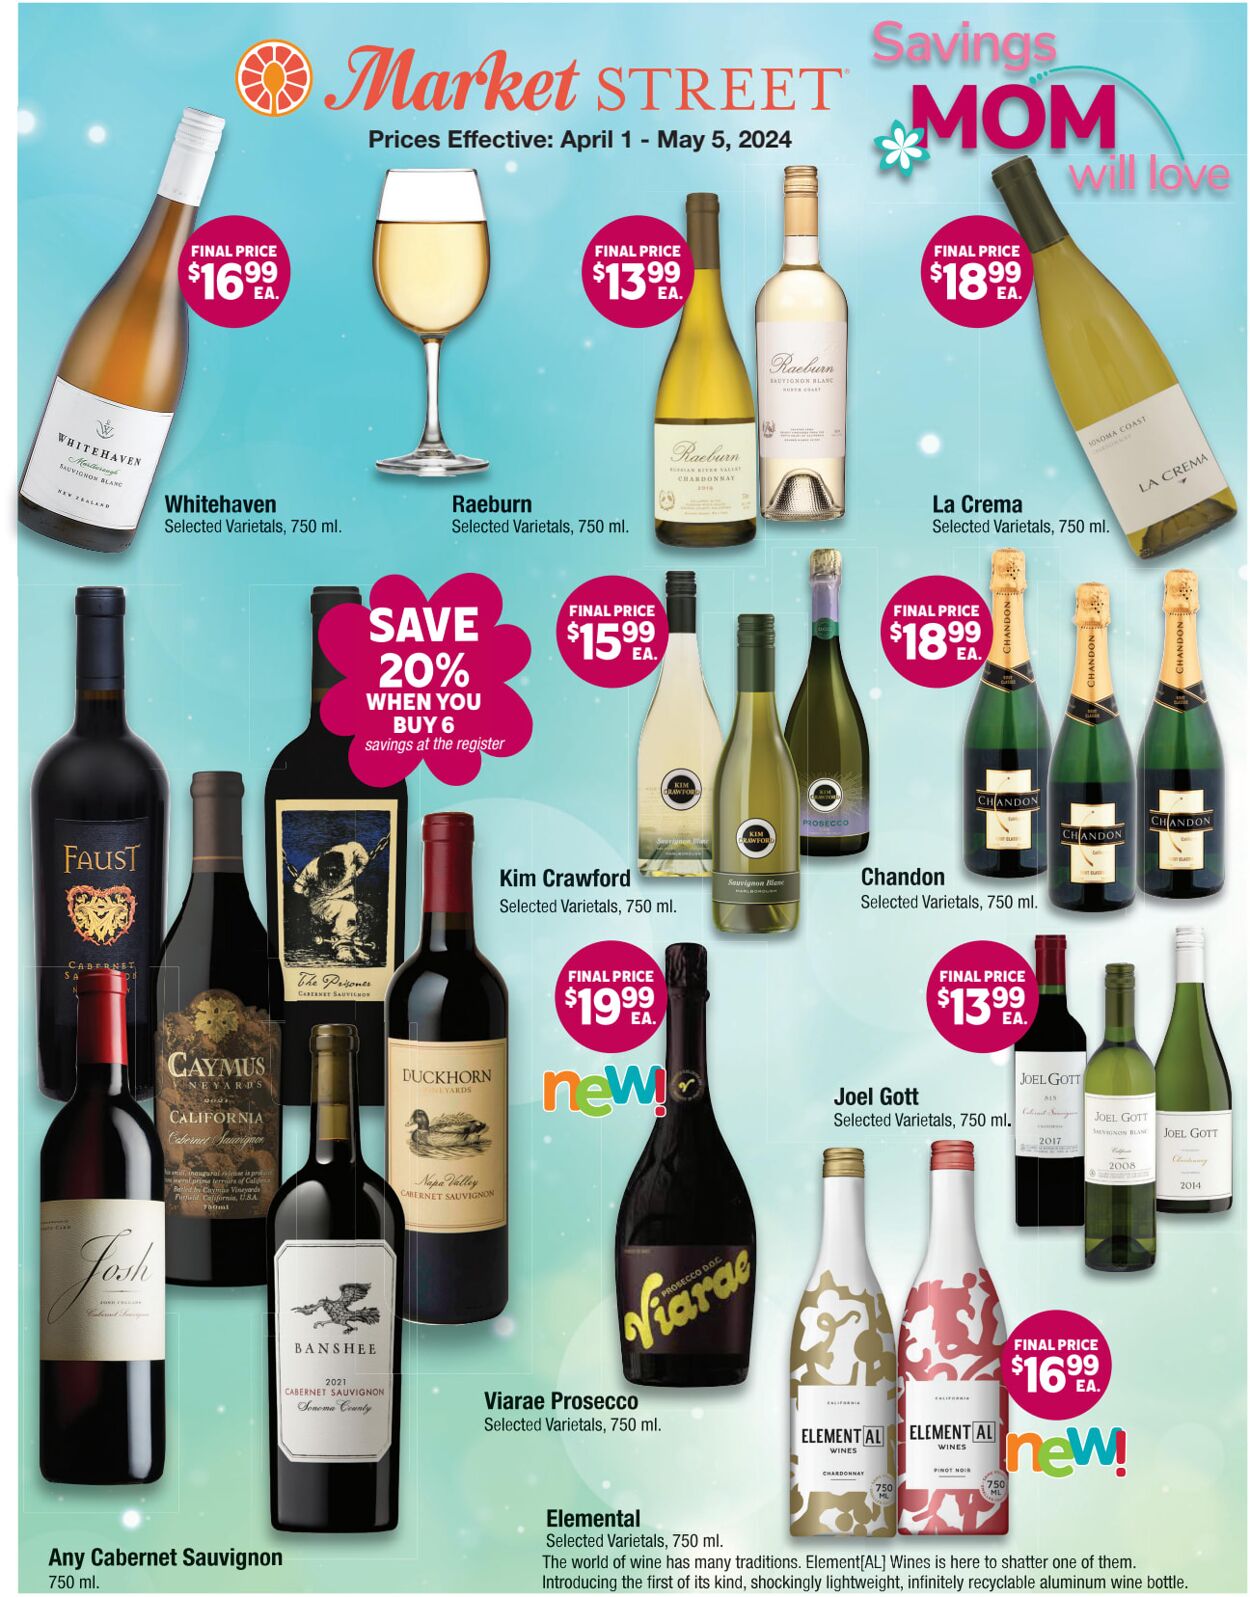 Weekly ad United Supermarkets 04/01/2024 - 05/05/2024